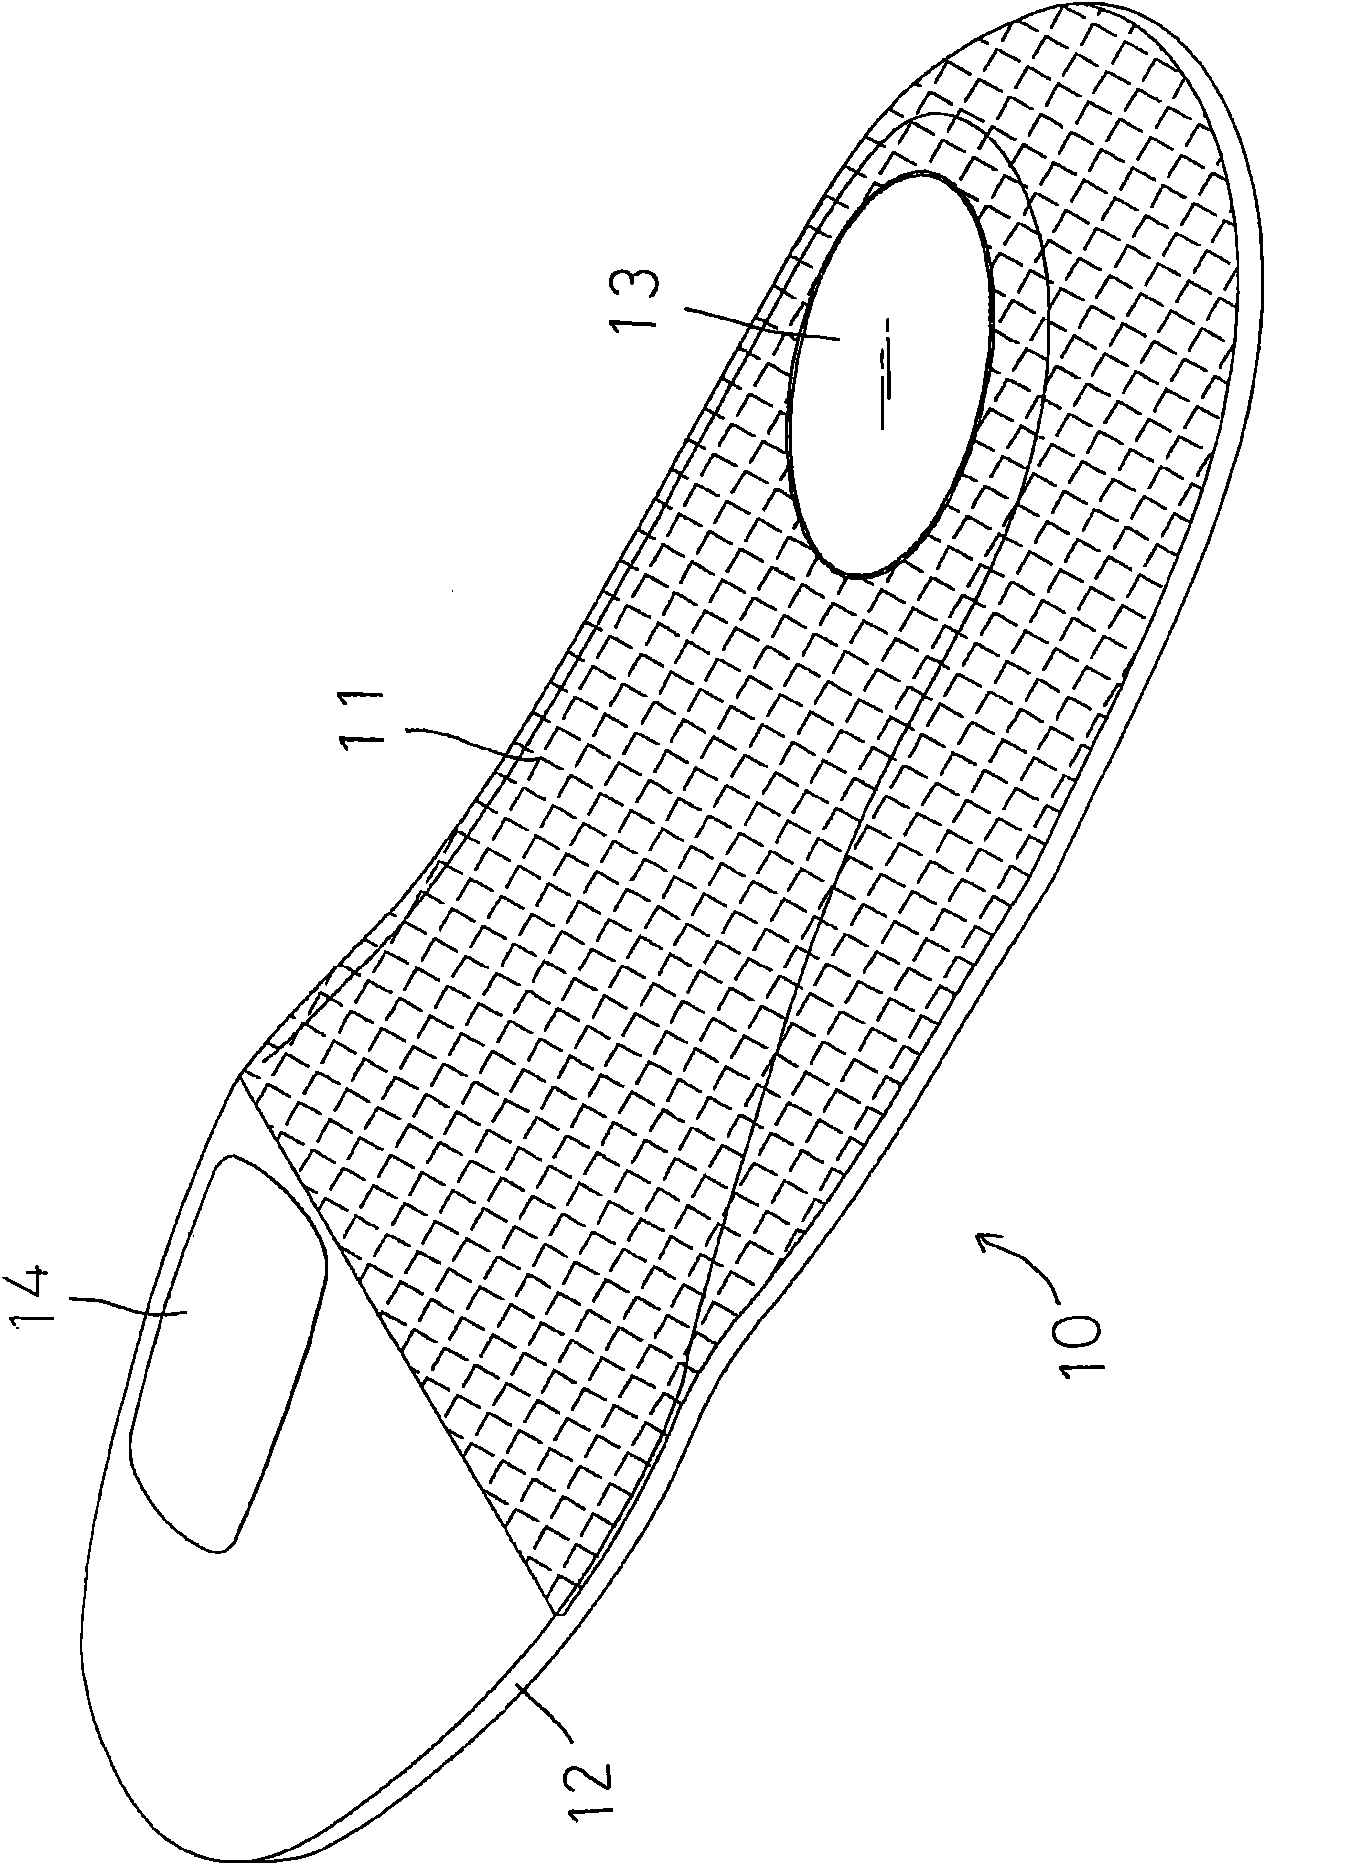 Insole compositely molded from multiple materials